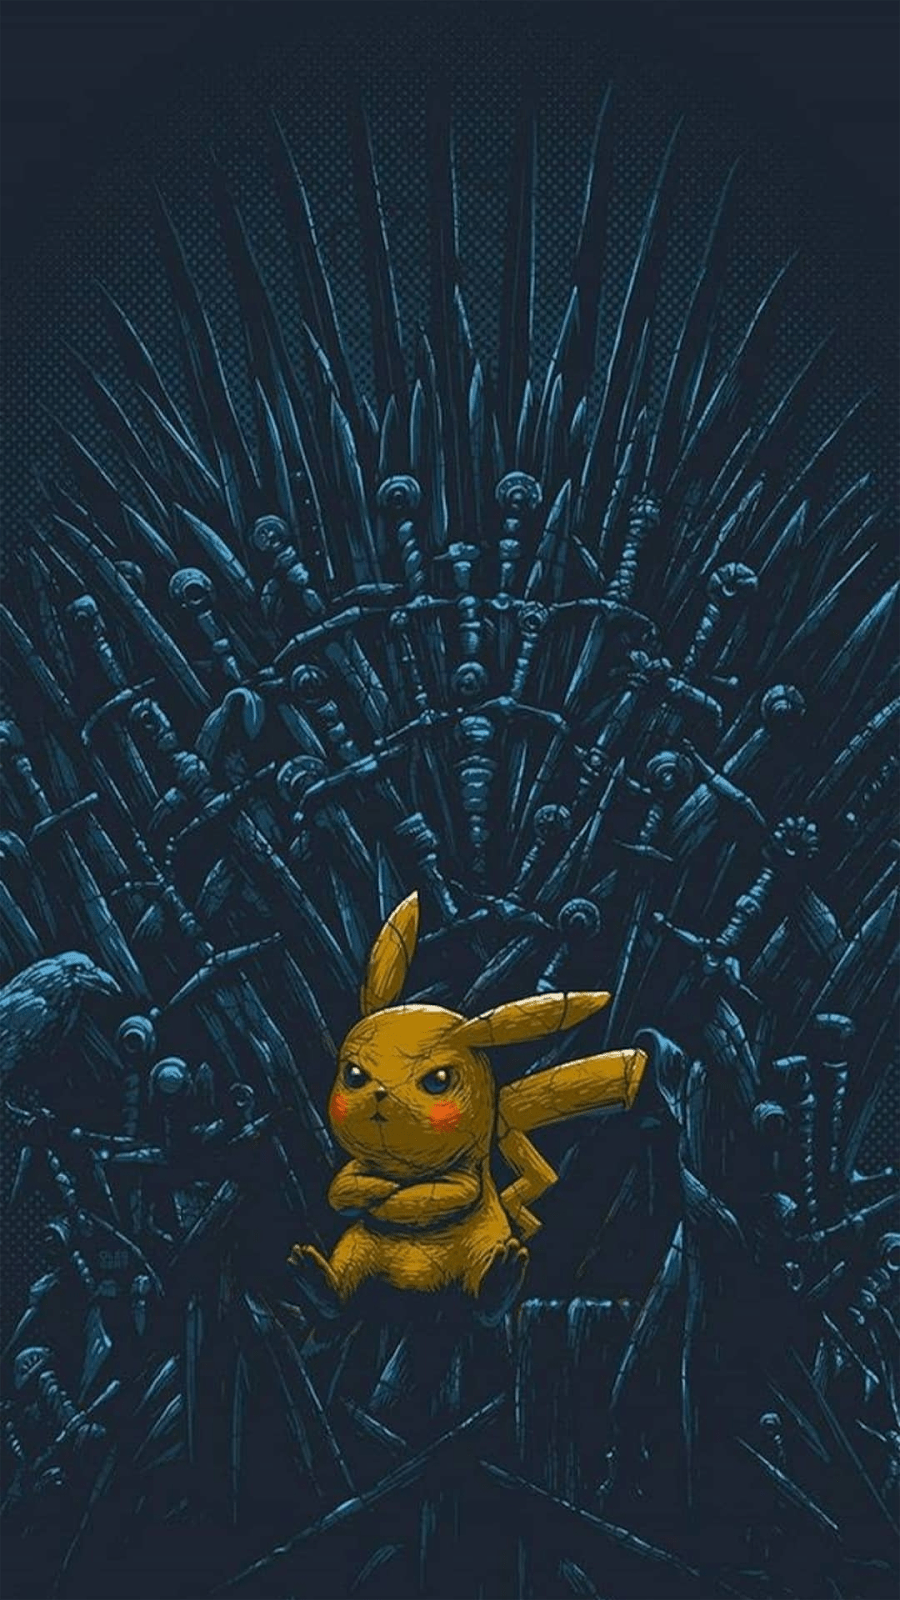 IPhone wallpaper with Pikachu sitting on a chair. - Pikachu